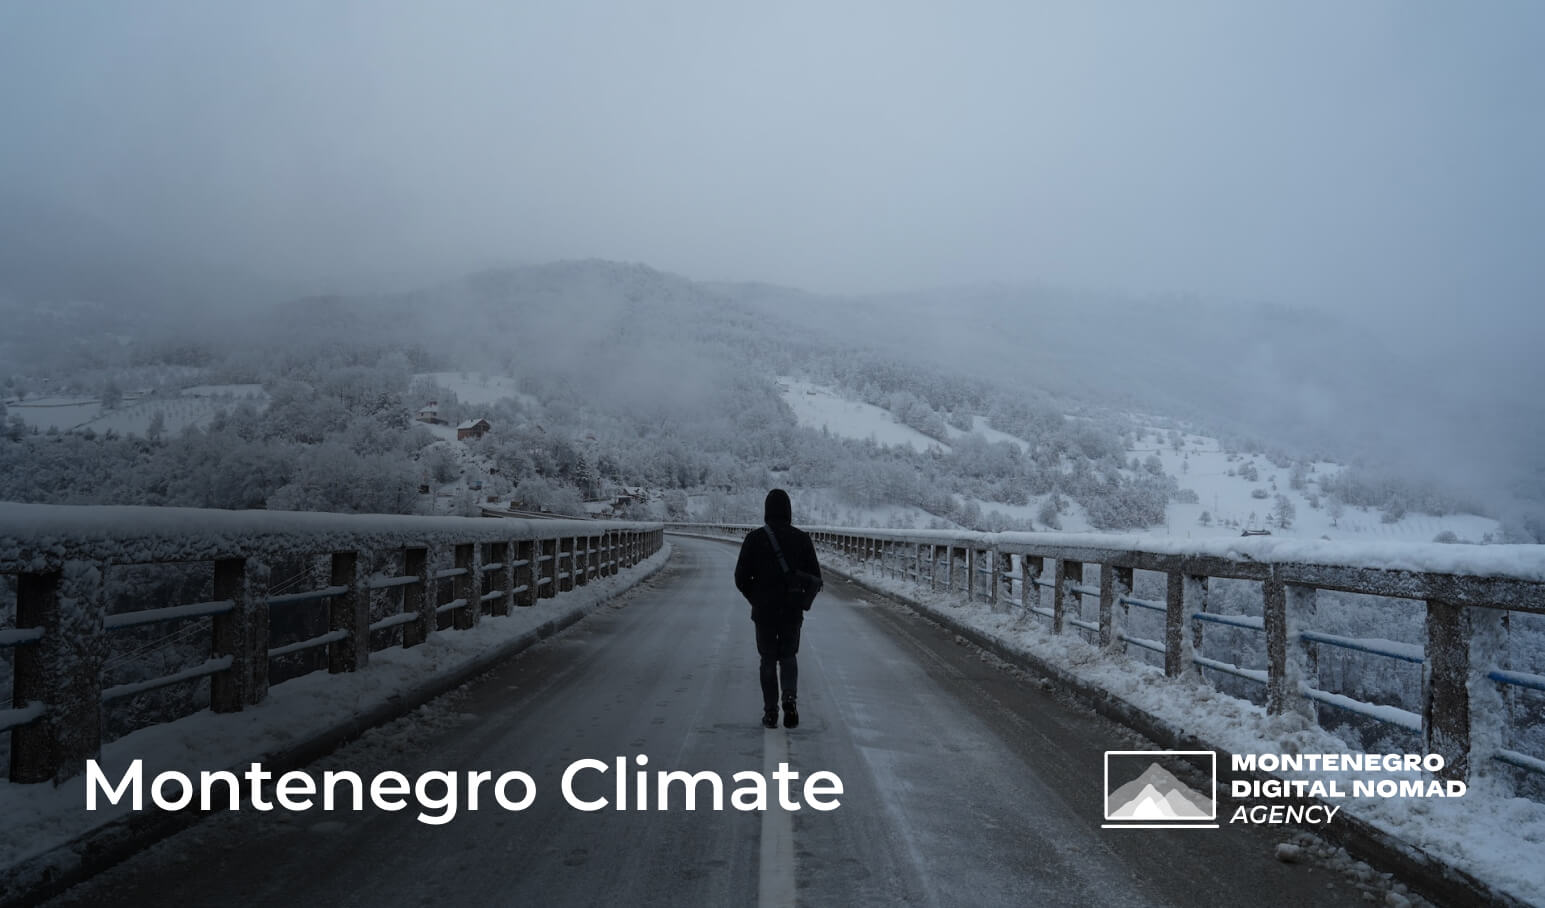 Image of a man standing on the Tara Bridge in Montenegro on a snowy winter day